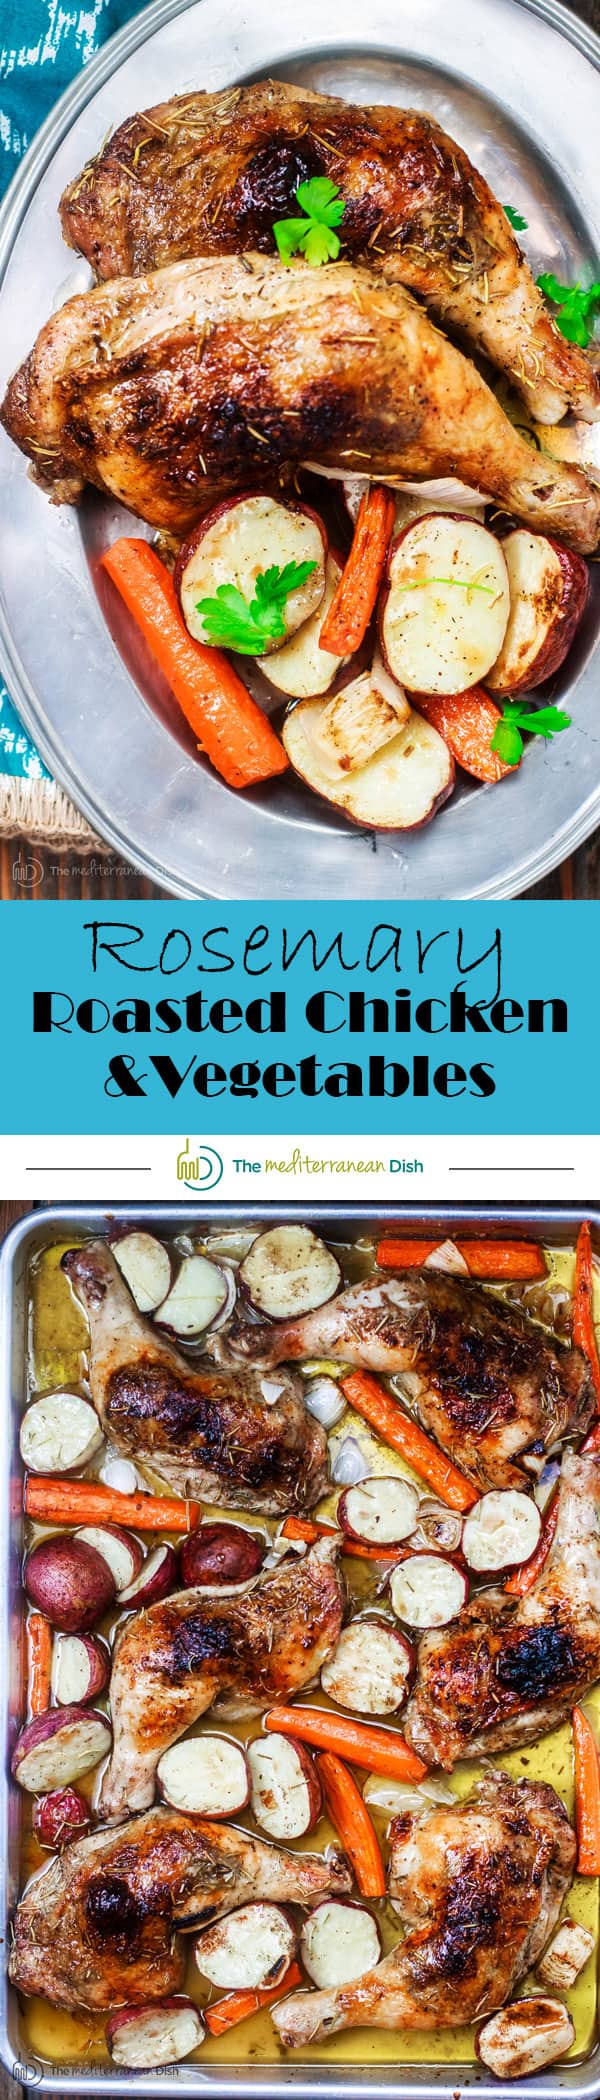 Rosemary Roasted Chicken Recipe with Vegetables | The Mediterranean Dish. A simple and satisfying one-pan roasted chicken recipe packed with flavor from Mediterranean spices including rosemary and a generous amount of lemon juice and olive oil. A healthy and cozy fuss-free dinner!